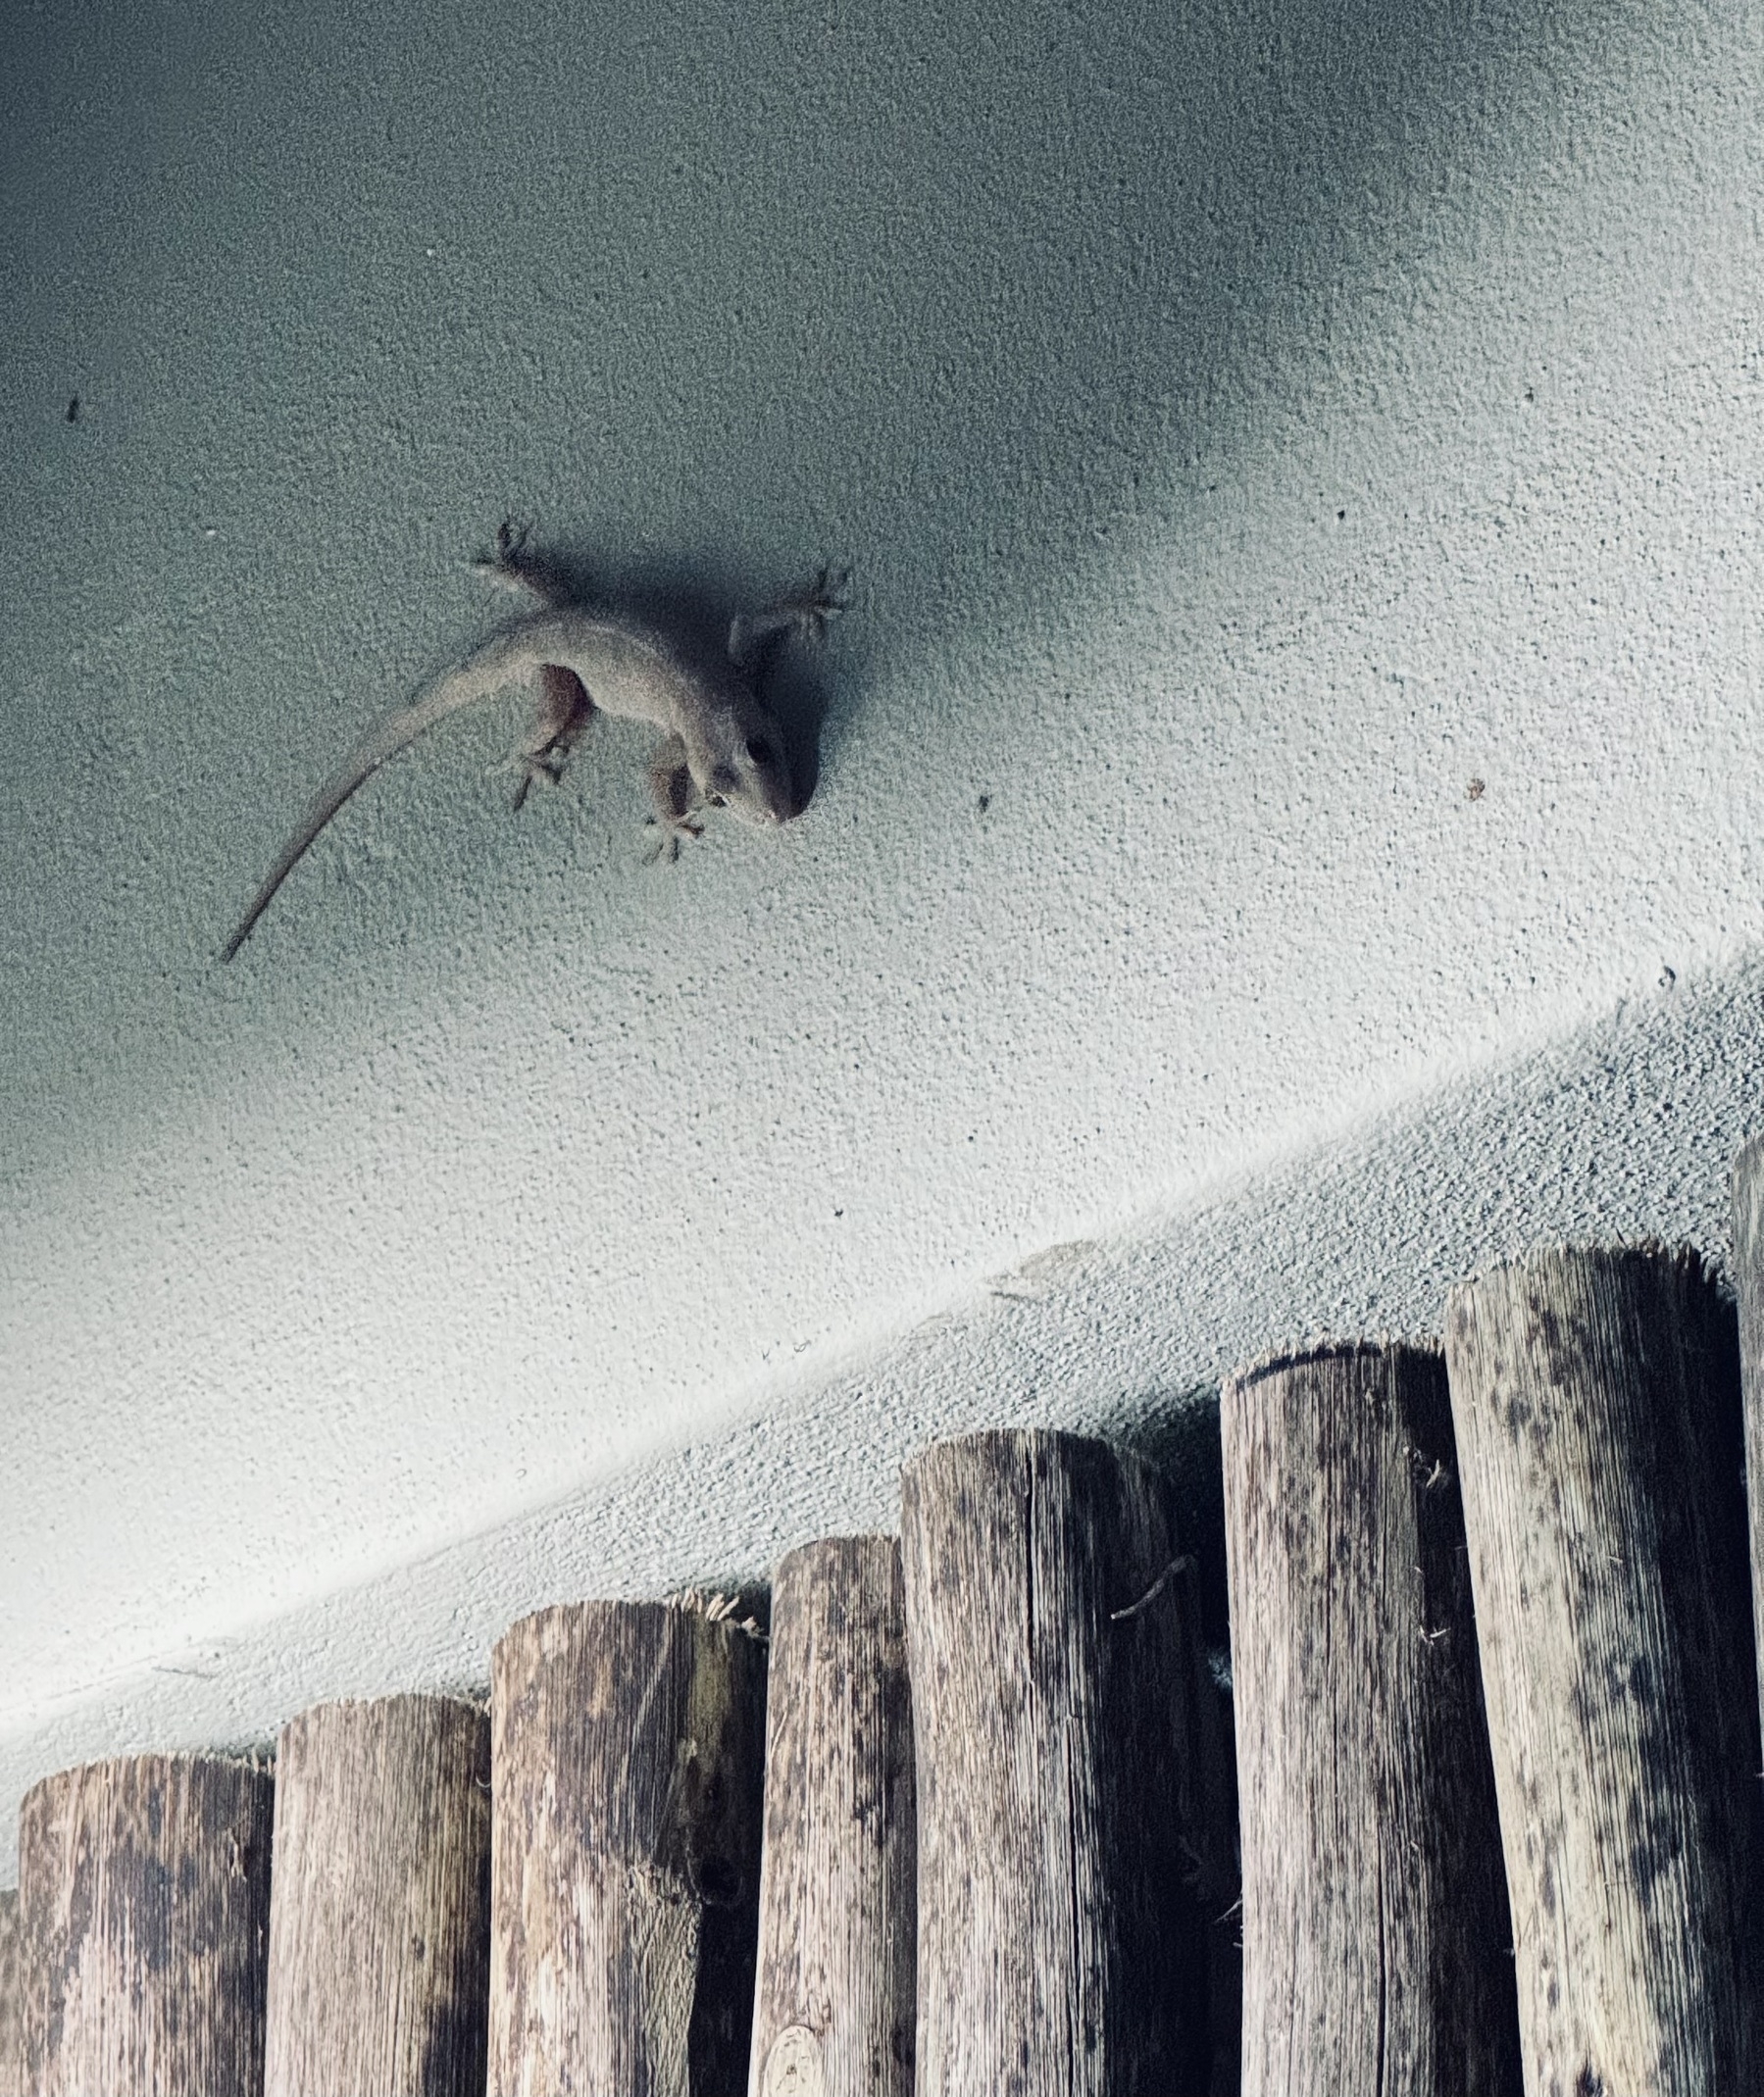 A gecko clinging to a wall above some decorative logs.